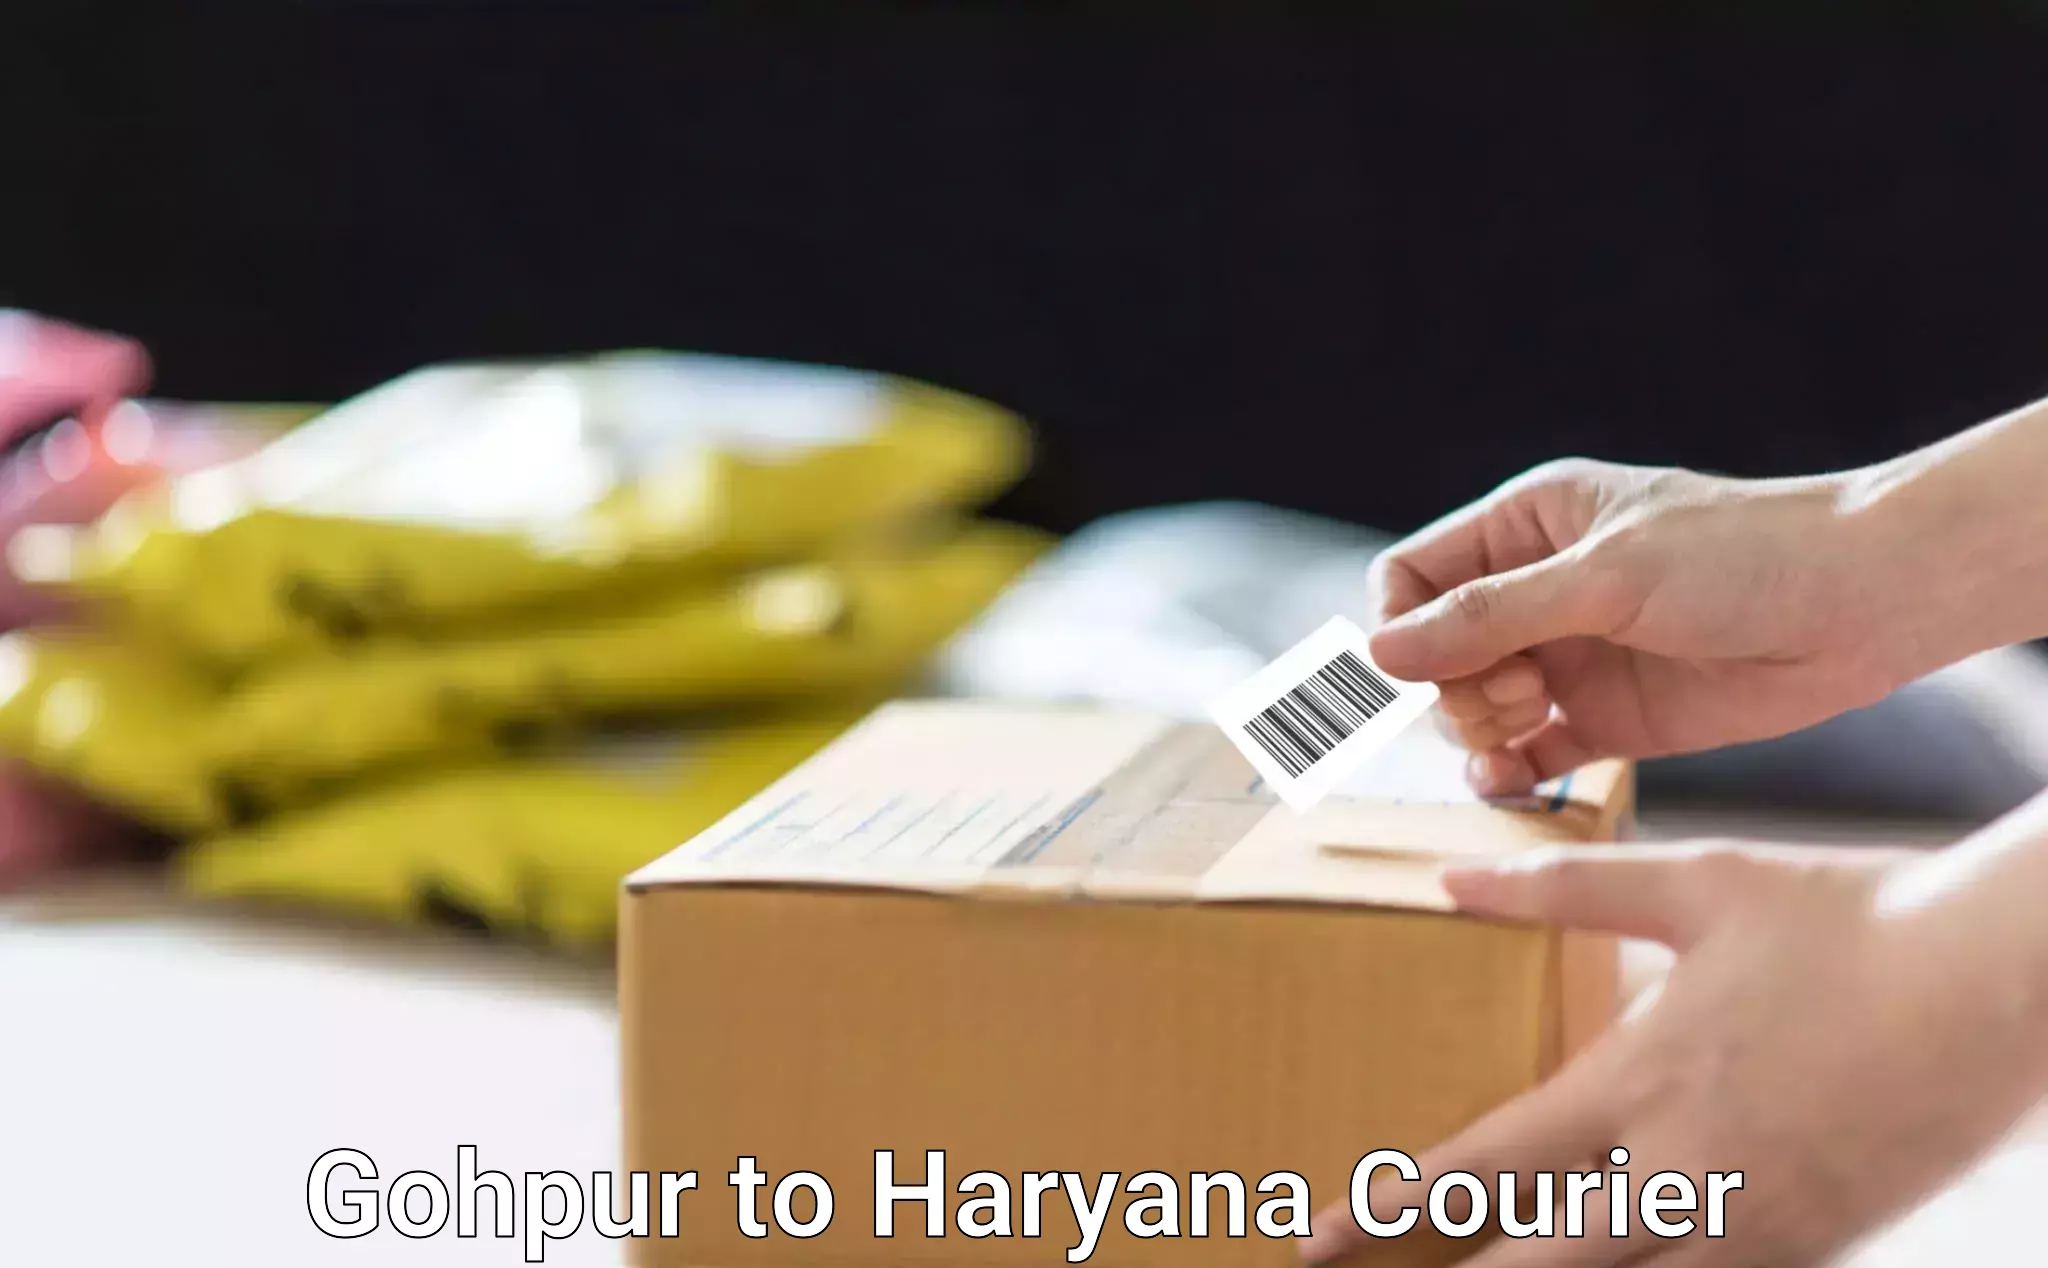 Same-day delivery solutions Gohpur to Haryana